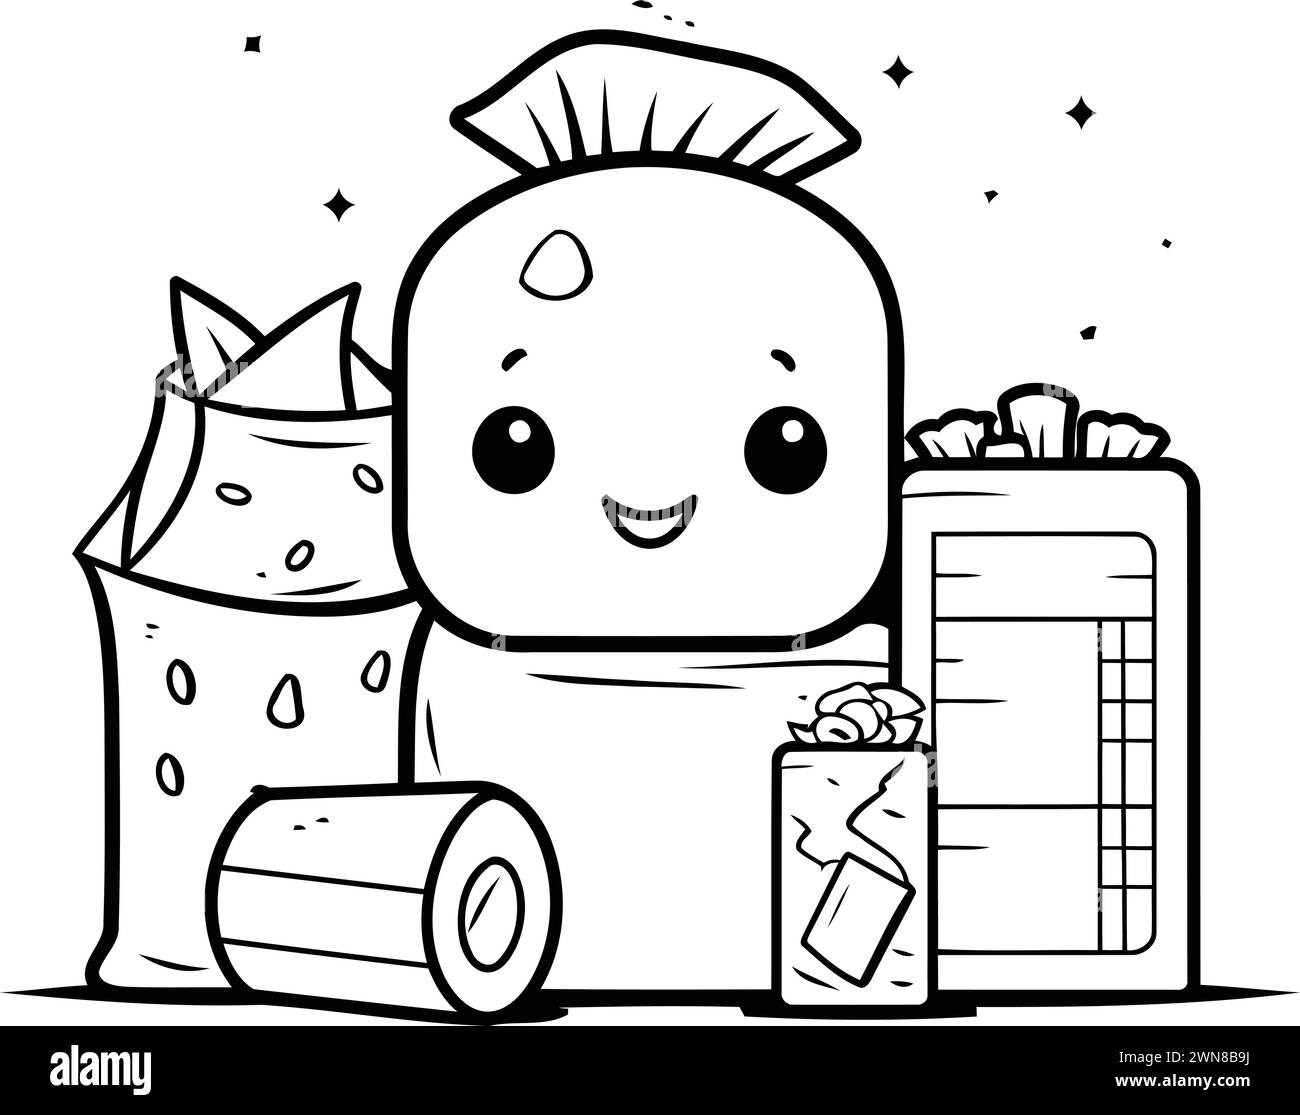 Cartoon Illustration of Bag of Food Character for Coloring Book Stock Vector